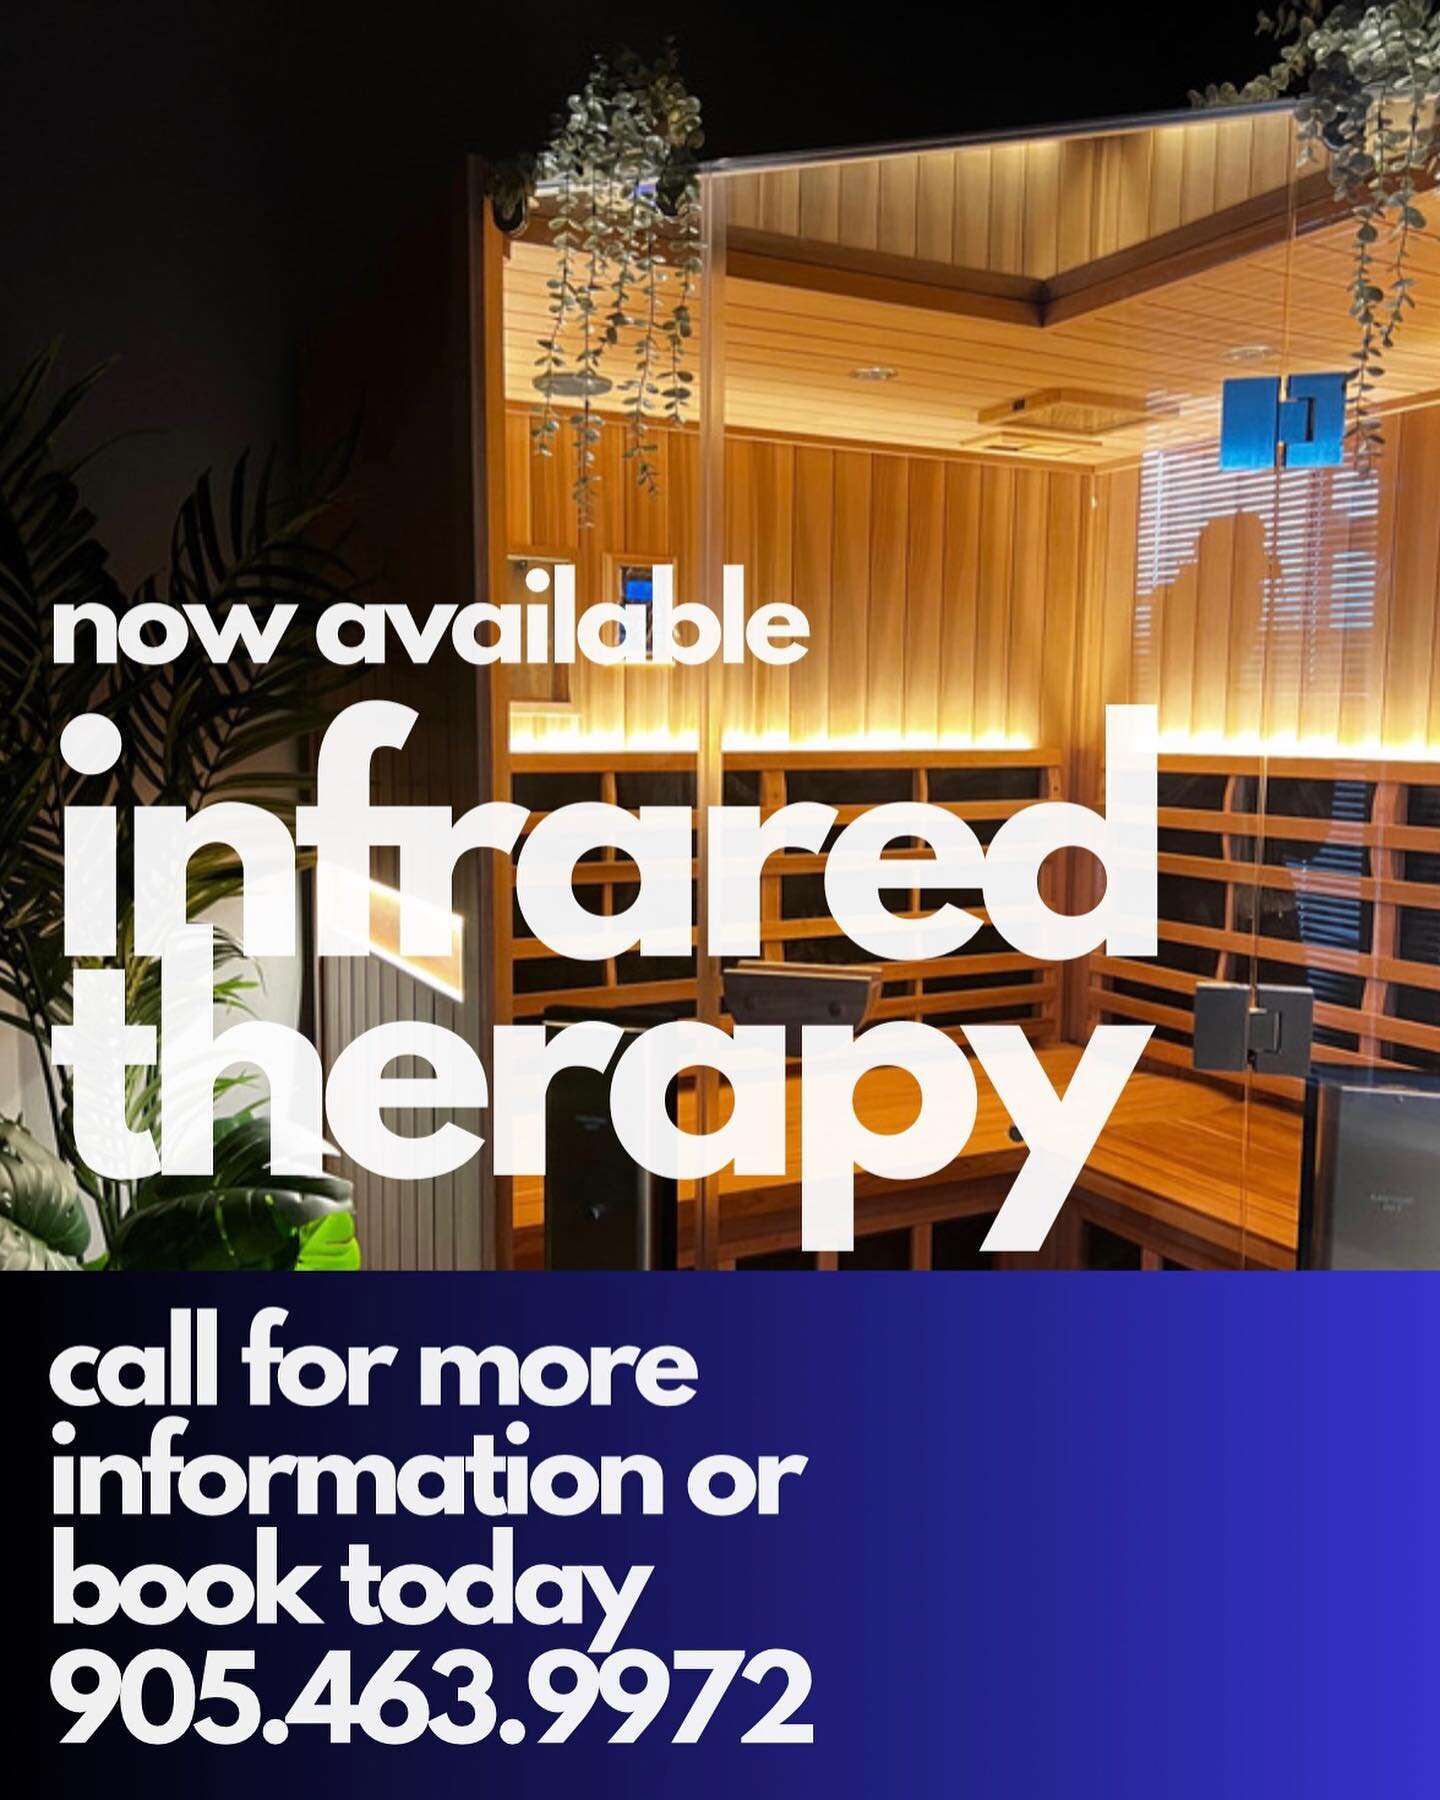 Need better sleep? Want to relieve muscle soreness? Are you looking for something to support an active lifestyle? Try our new infrared therapy. To learn more about your appointment options or book today, contact us now!